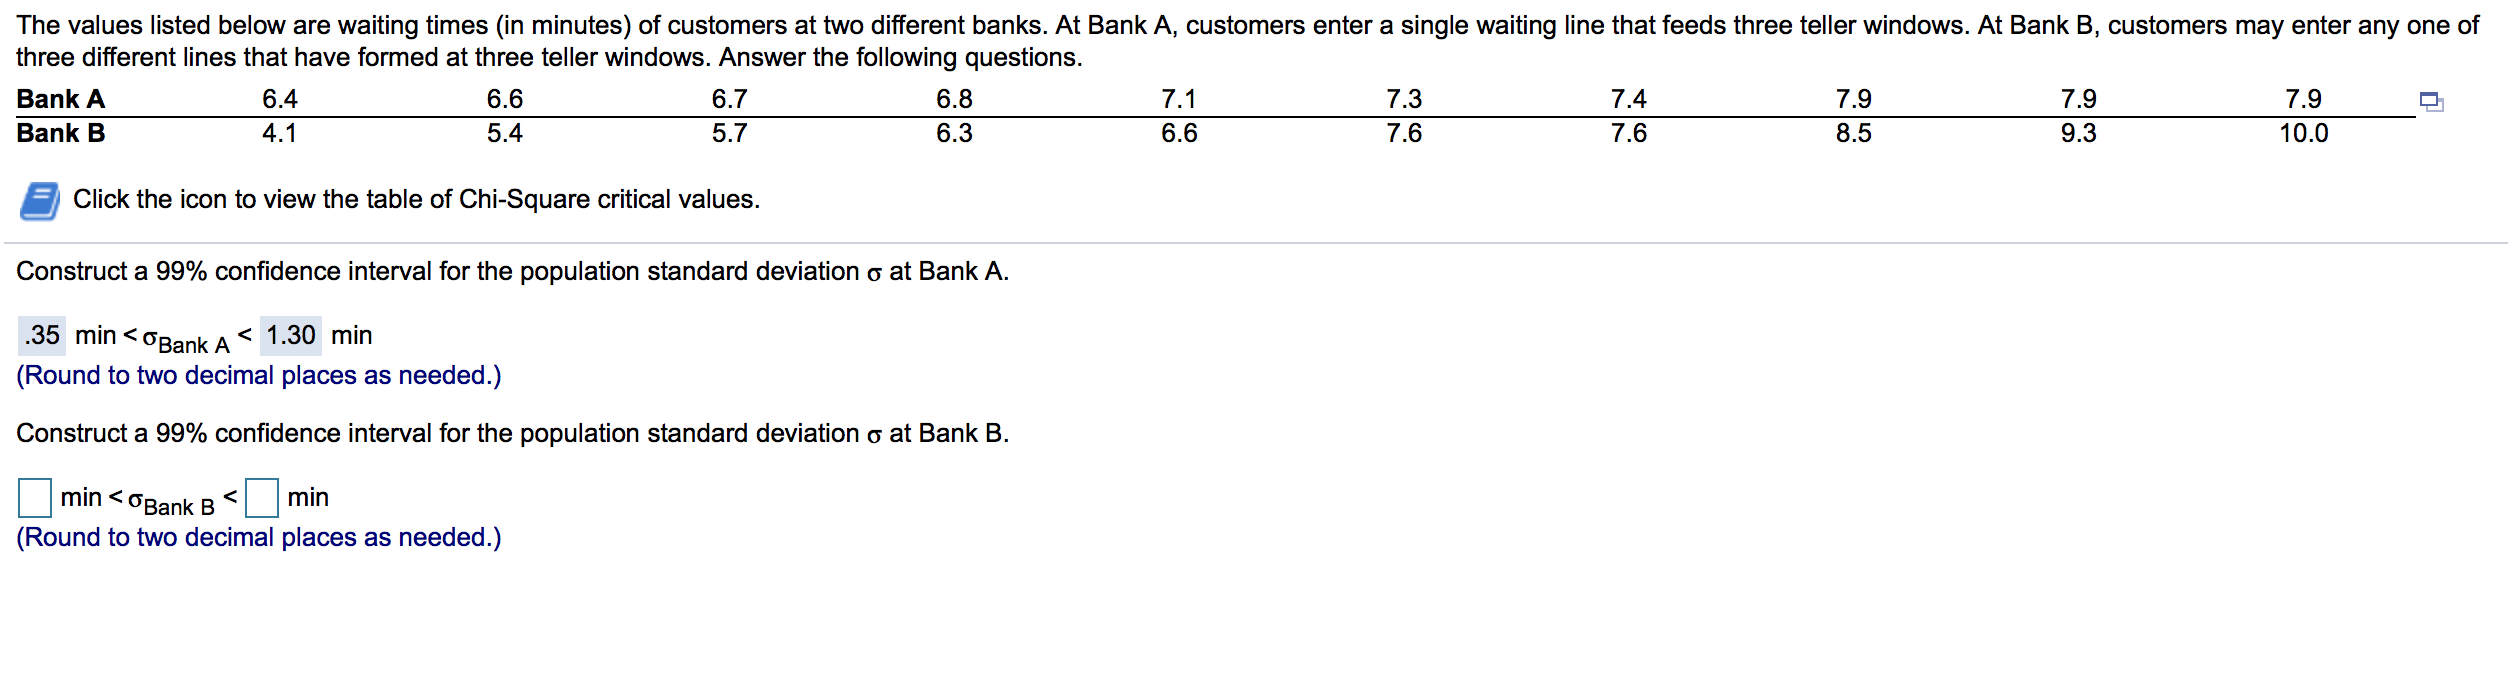 The values listed below are waiting times (in minutes) of customers at two different banks. At Bank A, customers enter a single waiting line that feeds three teller windows. At Bank B, customers may enter any one of
three different lines that have formed at three teller windows. Answer the following questions.
Bank A
6.4
6.6
6.7
6.8
7.1
7.3
7.4
7.9
7.9
7.9
Bank B
4.1
5.4
5.7
6.3
6.6
7.6
7.6
8.5
9.3
10.0
Click the icon to view the table of Chi-Square critical values.
Construct a 99% confidence interval for the population standard deviation o at Bank A.
35 min <OBank A
< 1.30 min
(Round to two decimal places as needed.)
Construct a 99% confidence interval for the population standard deviation o at Bank B.
min <
min
<OBank B<
(Round to two decimal places as needed.)
